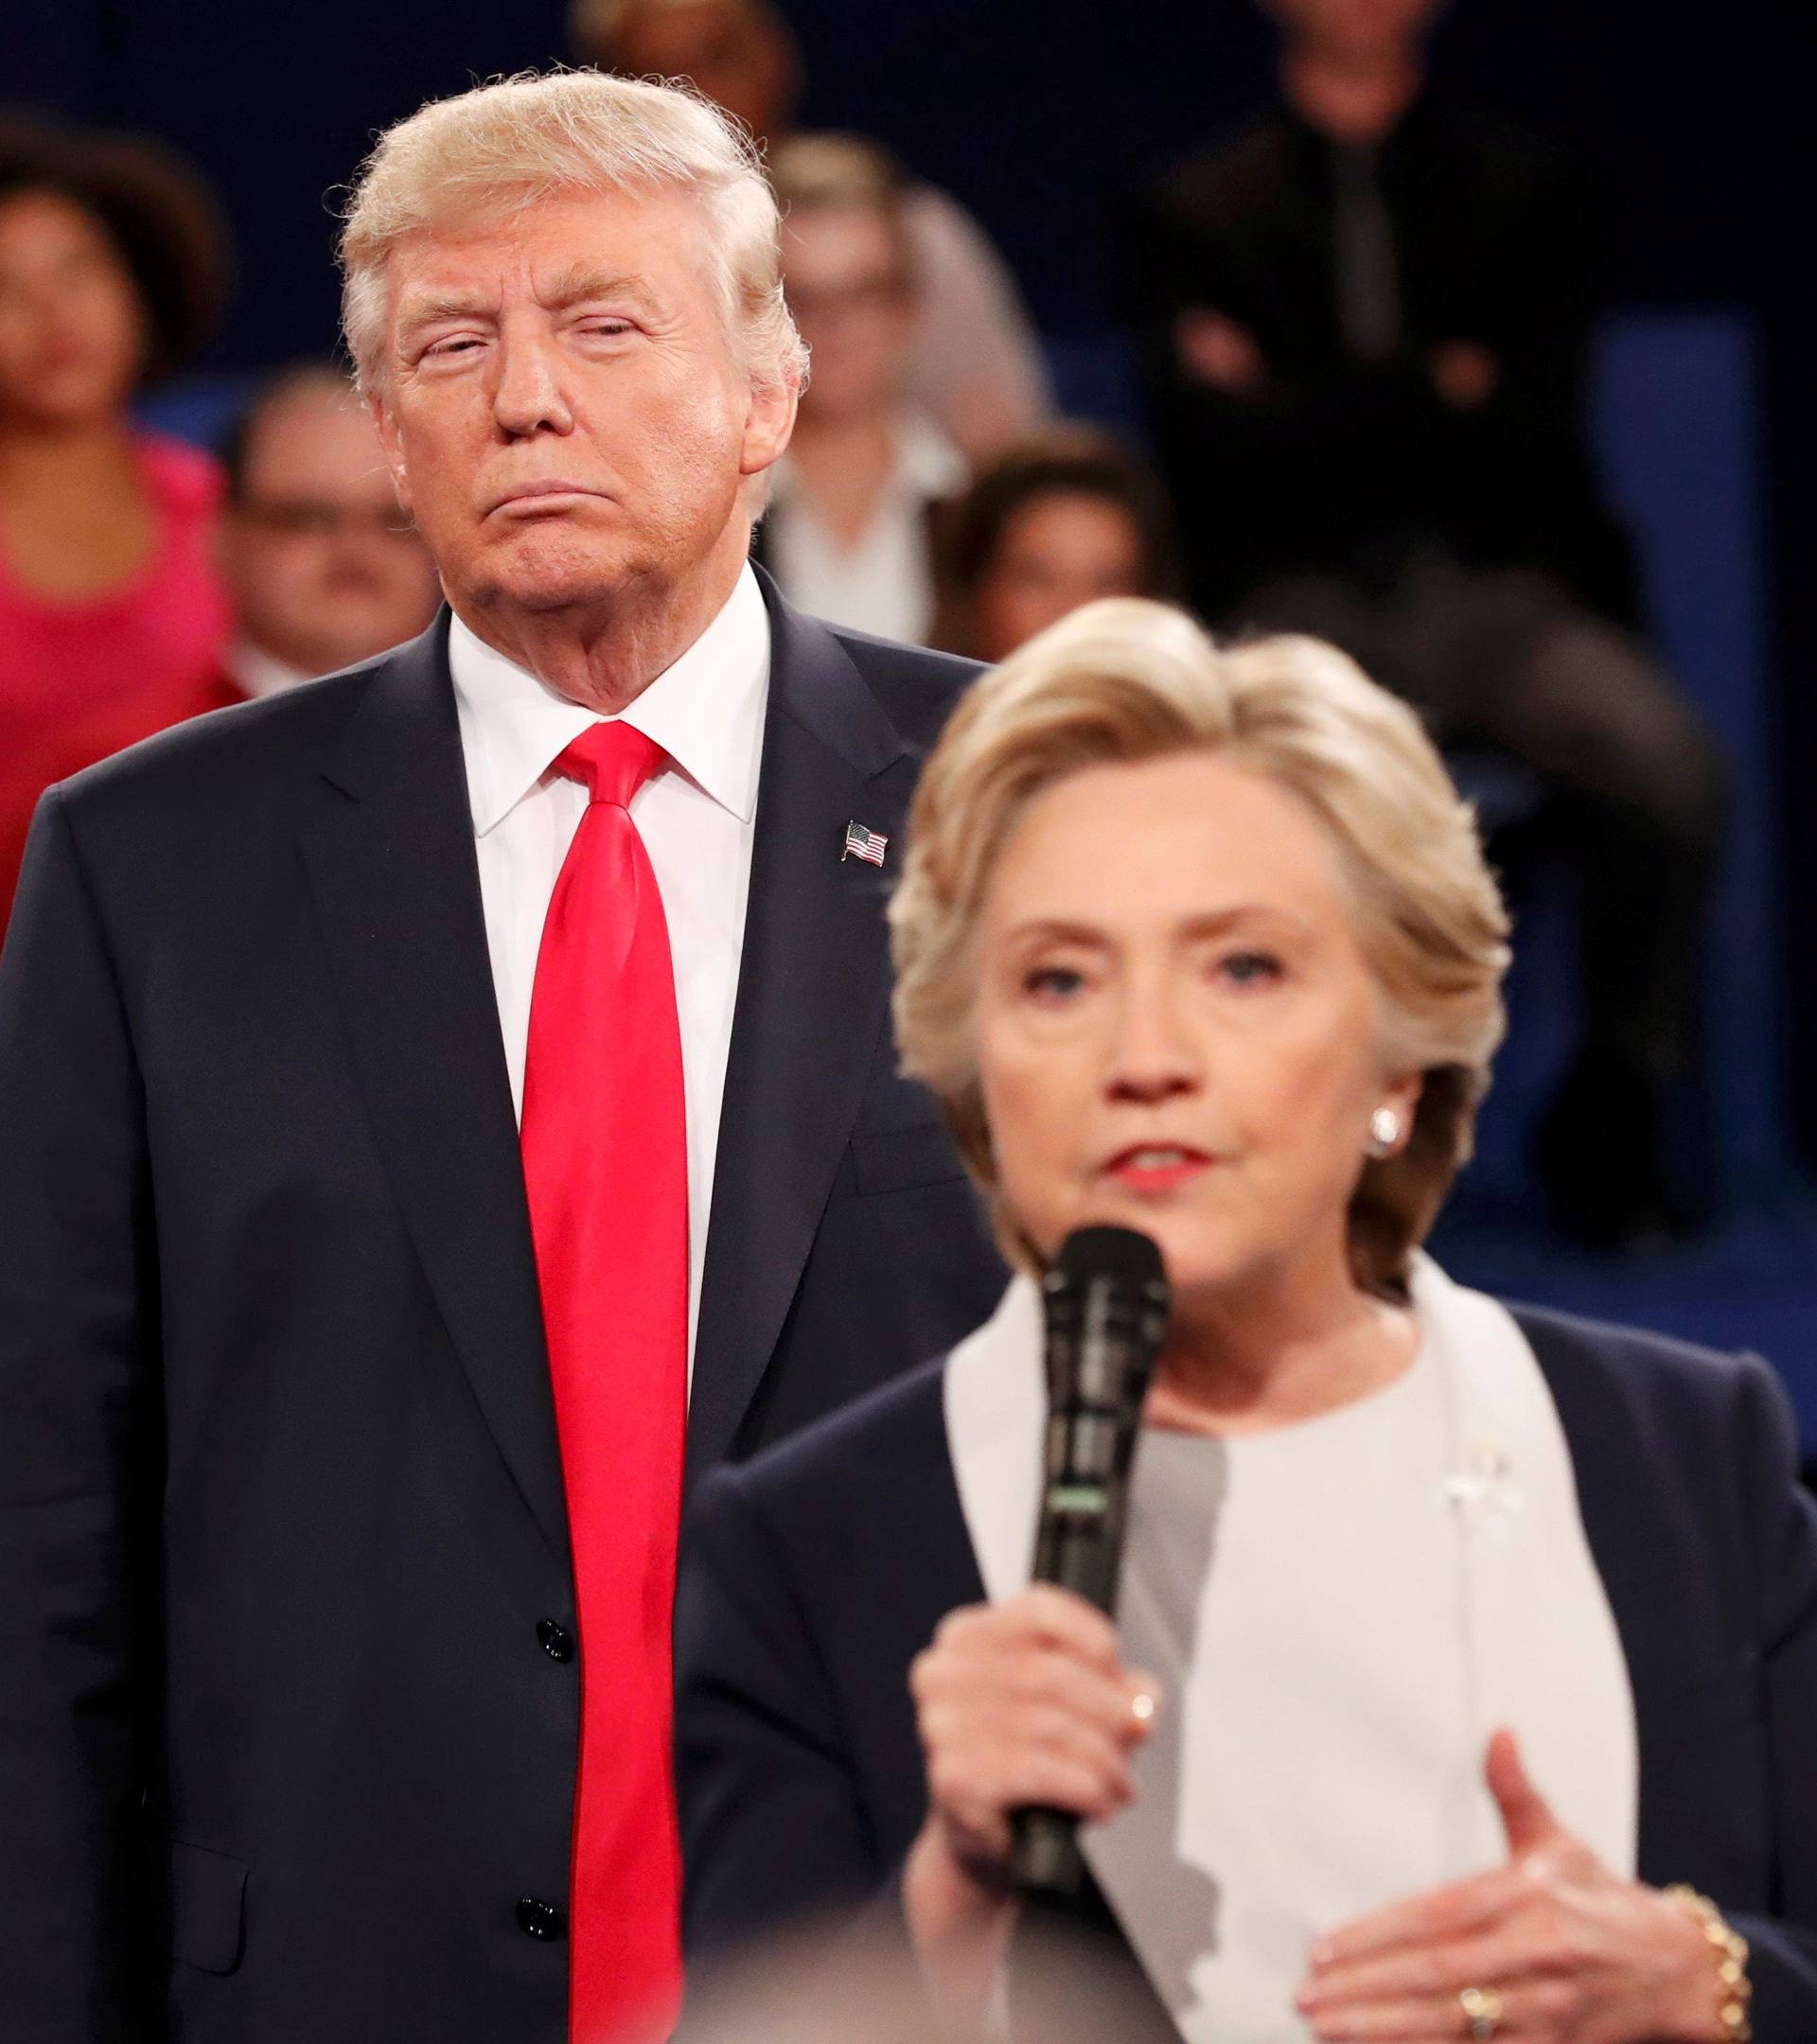 Republican U.S. presidential nominee Trump listens as Democratic nominee Clinton answers a question from the audience during their presidential town hall debate in St. Louis